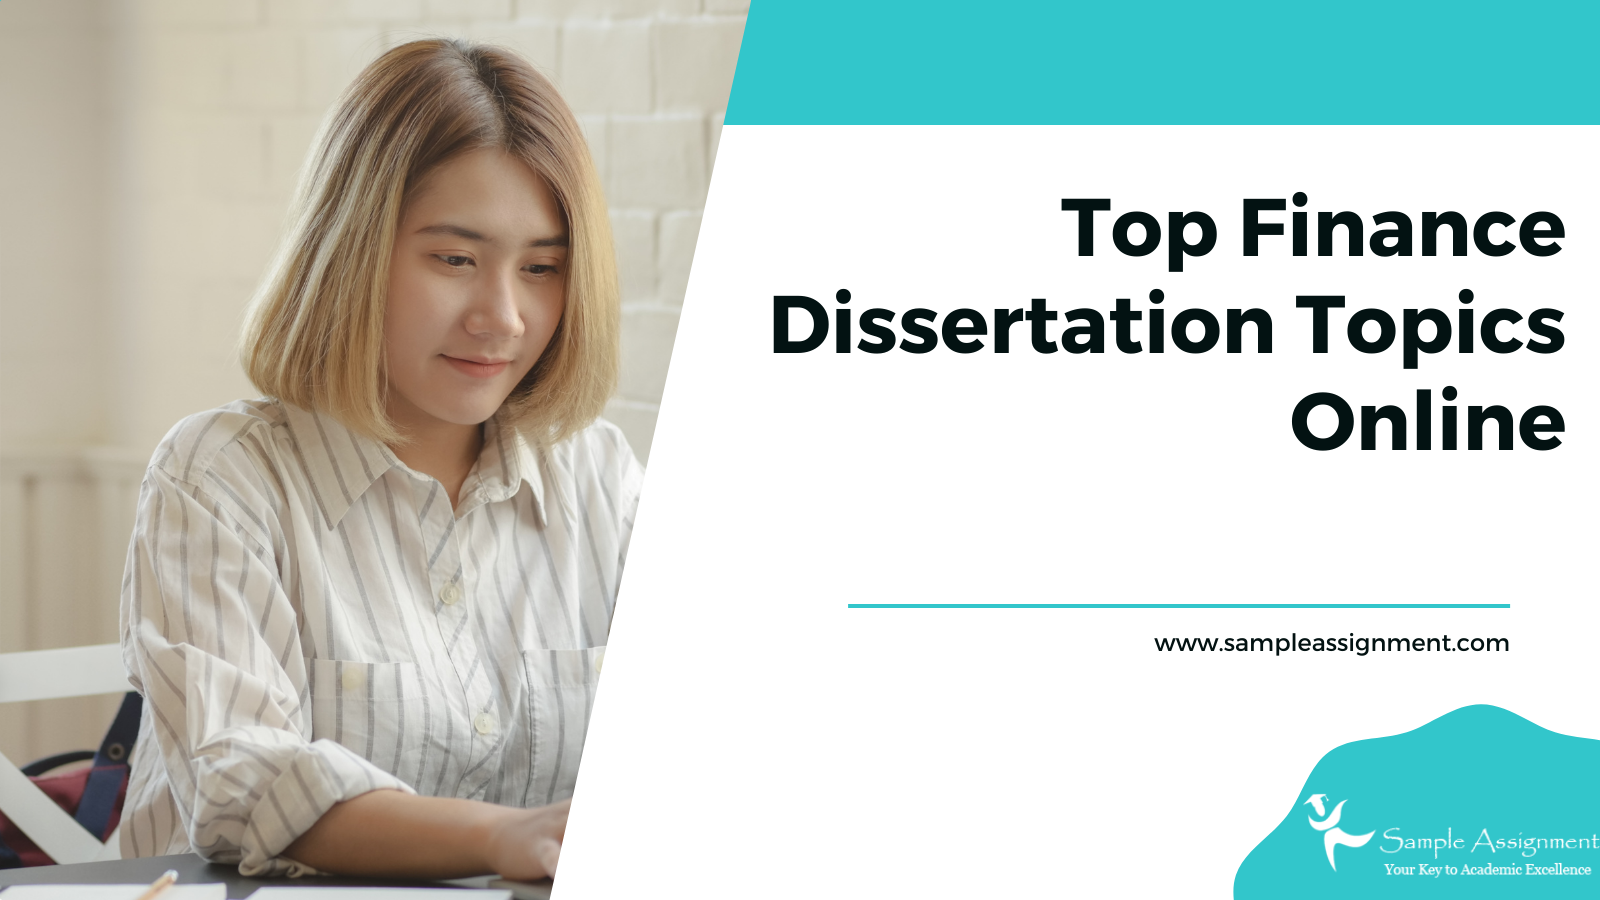 dissertation topics related to finance